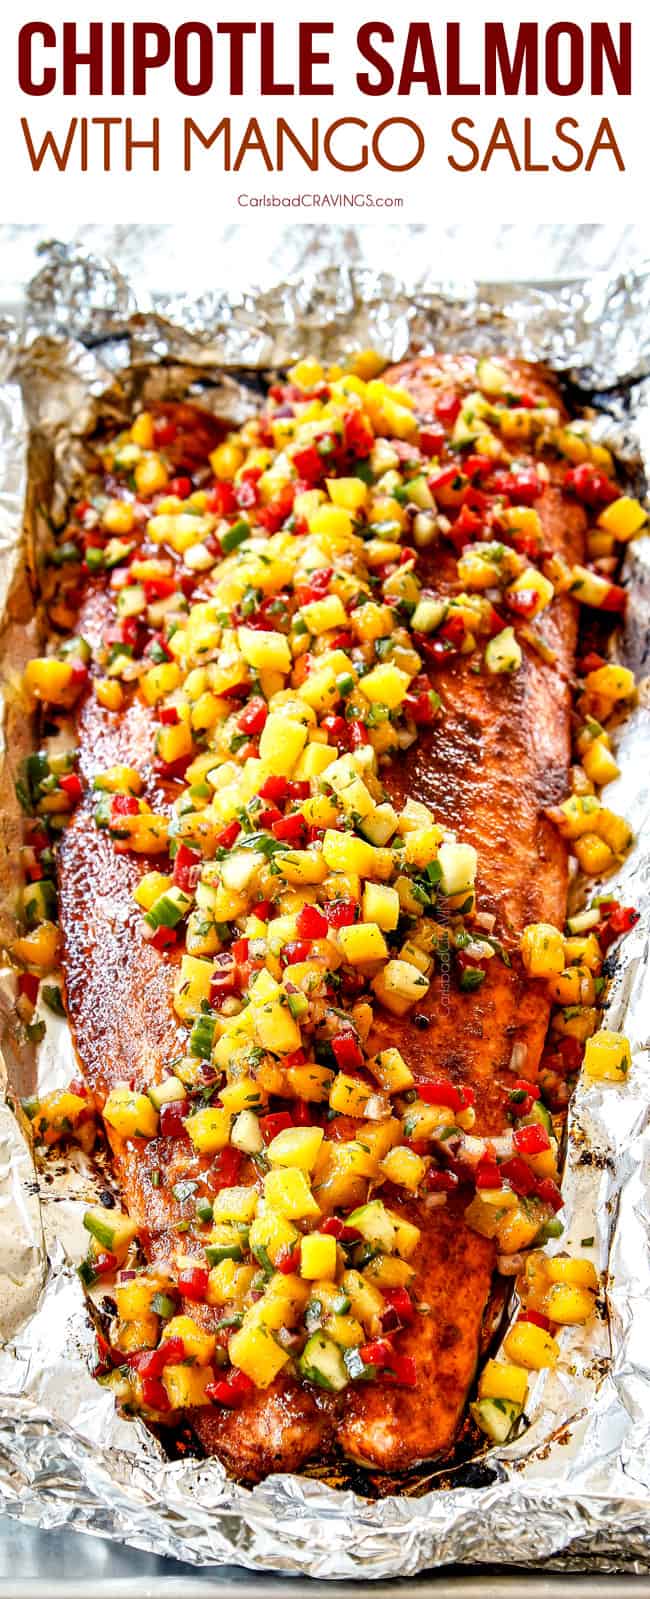 It's bursting with flavor thanks to a vivid chipotle wet rub that's accented with sweet, juicy fresh Mango Salsa.